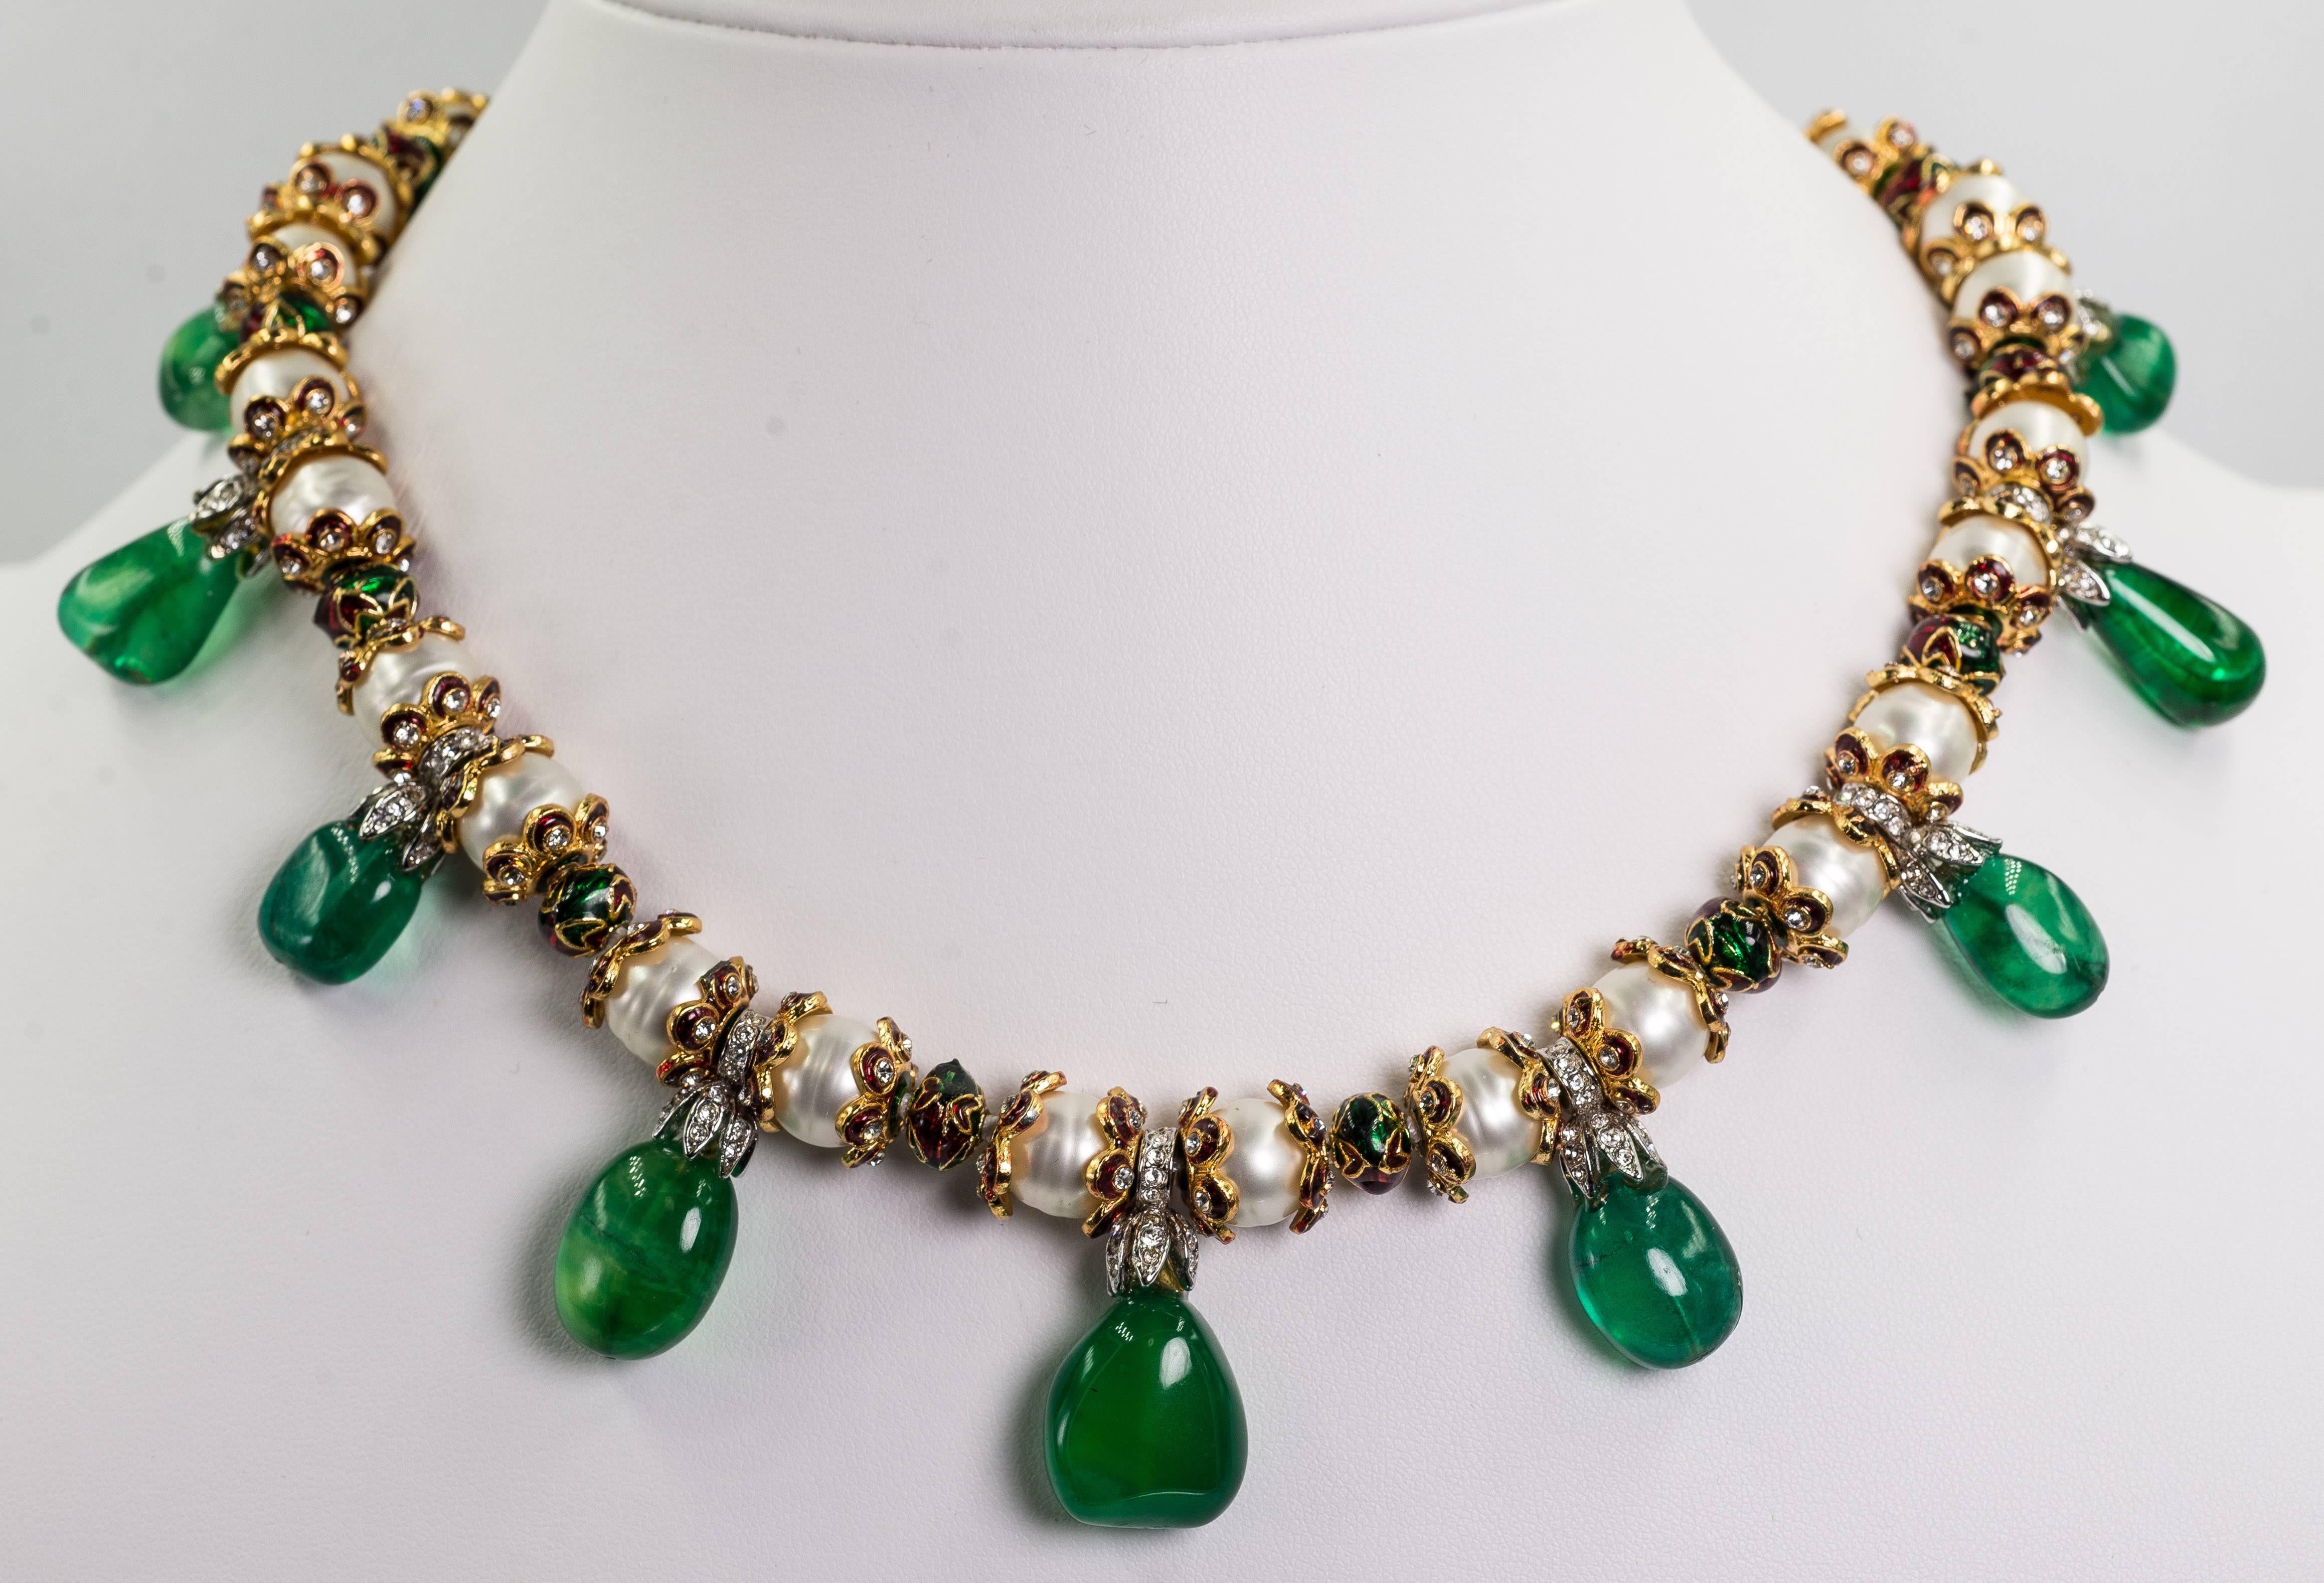 Royal Indian style faux emerald pearl Jaipur enamel collier. This extraordinary beautiful necklace is composed of vintage glass baroque pearls interspaced with Indian Jaipur enamel motifs and all suspending nine crystal topped green quartz faux